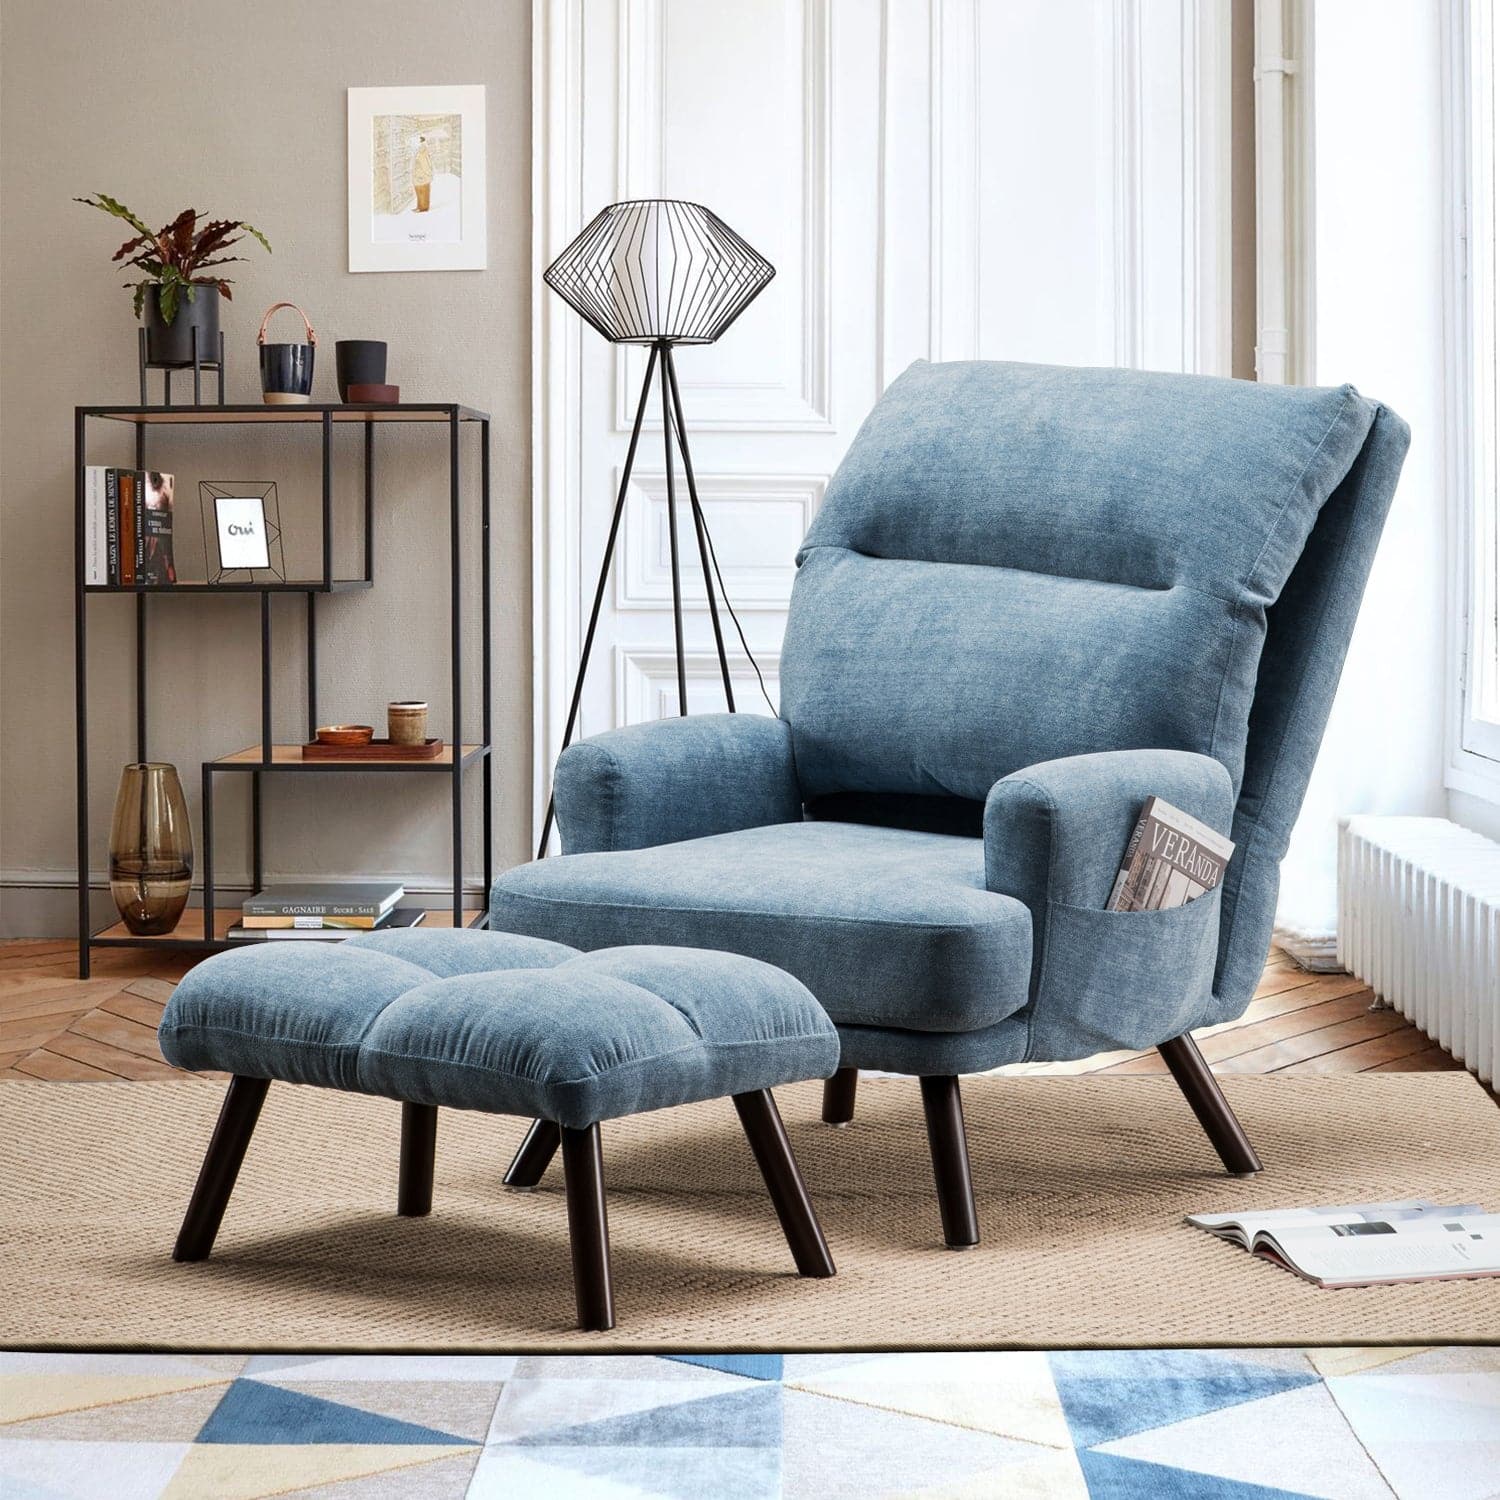 Ovios Living Room Accent Chair with Ottoman, 6 Angles Adjustable